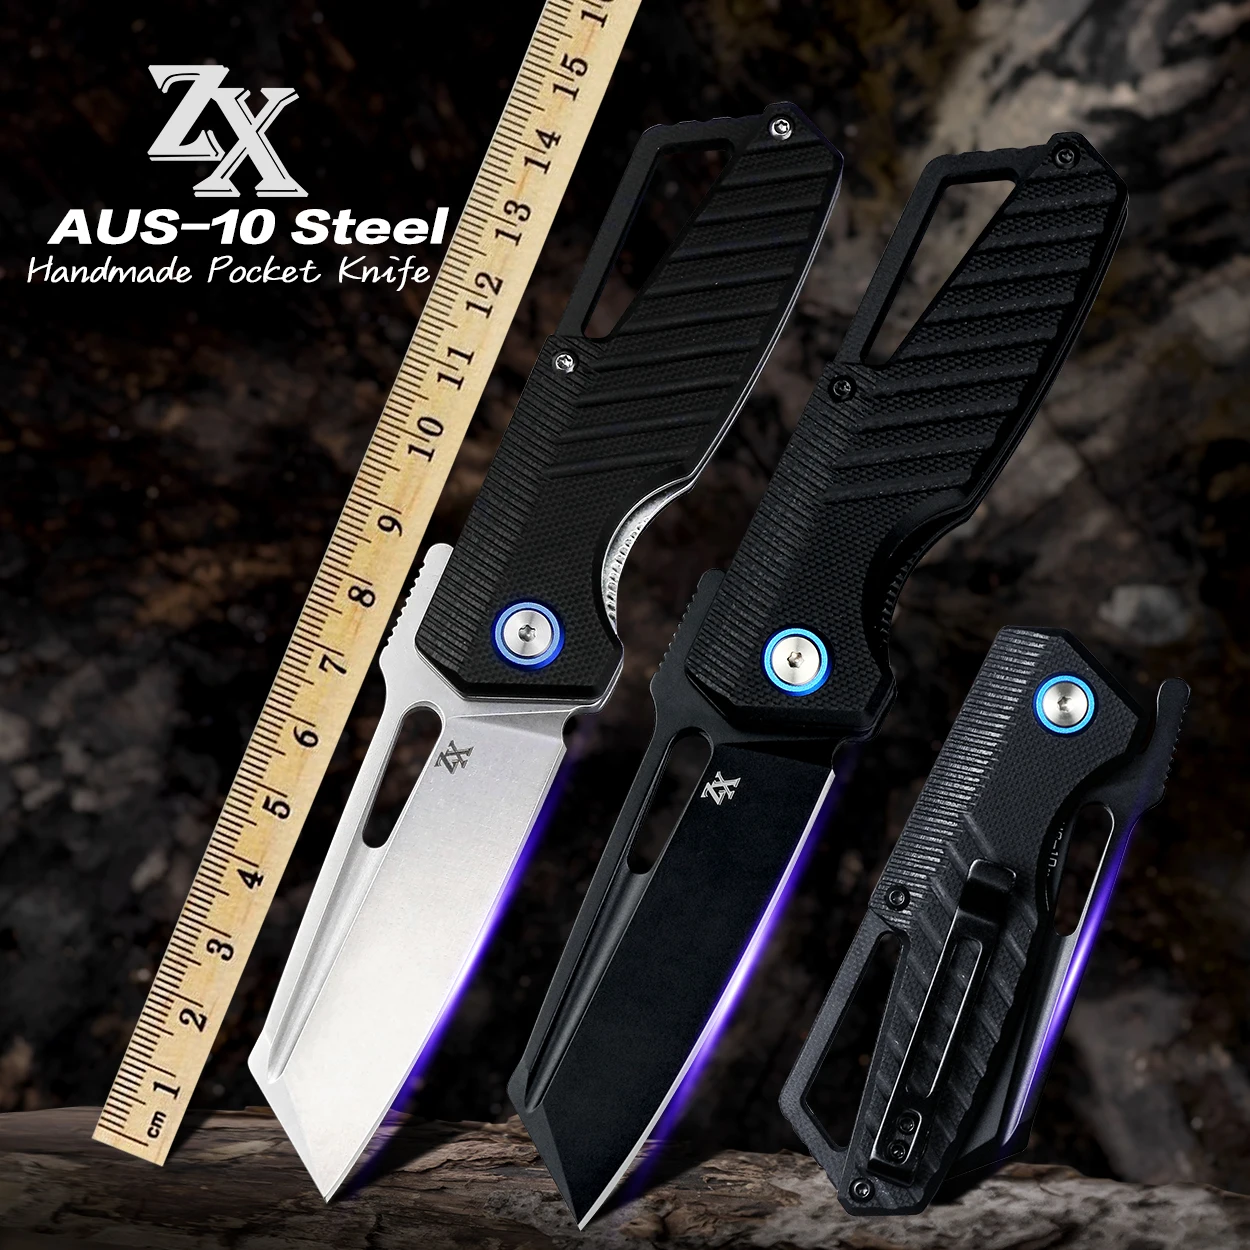 https://ae01.alicdn.com/kf/S4a32ad25e1c34e948ead4ec40eb35da2a/ZX-Pocket-Knife-Folding-Knife-with-ball-bearing-High-hardness-AUS-10-Steel-Knife-for-Camping.jpg